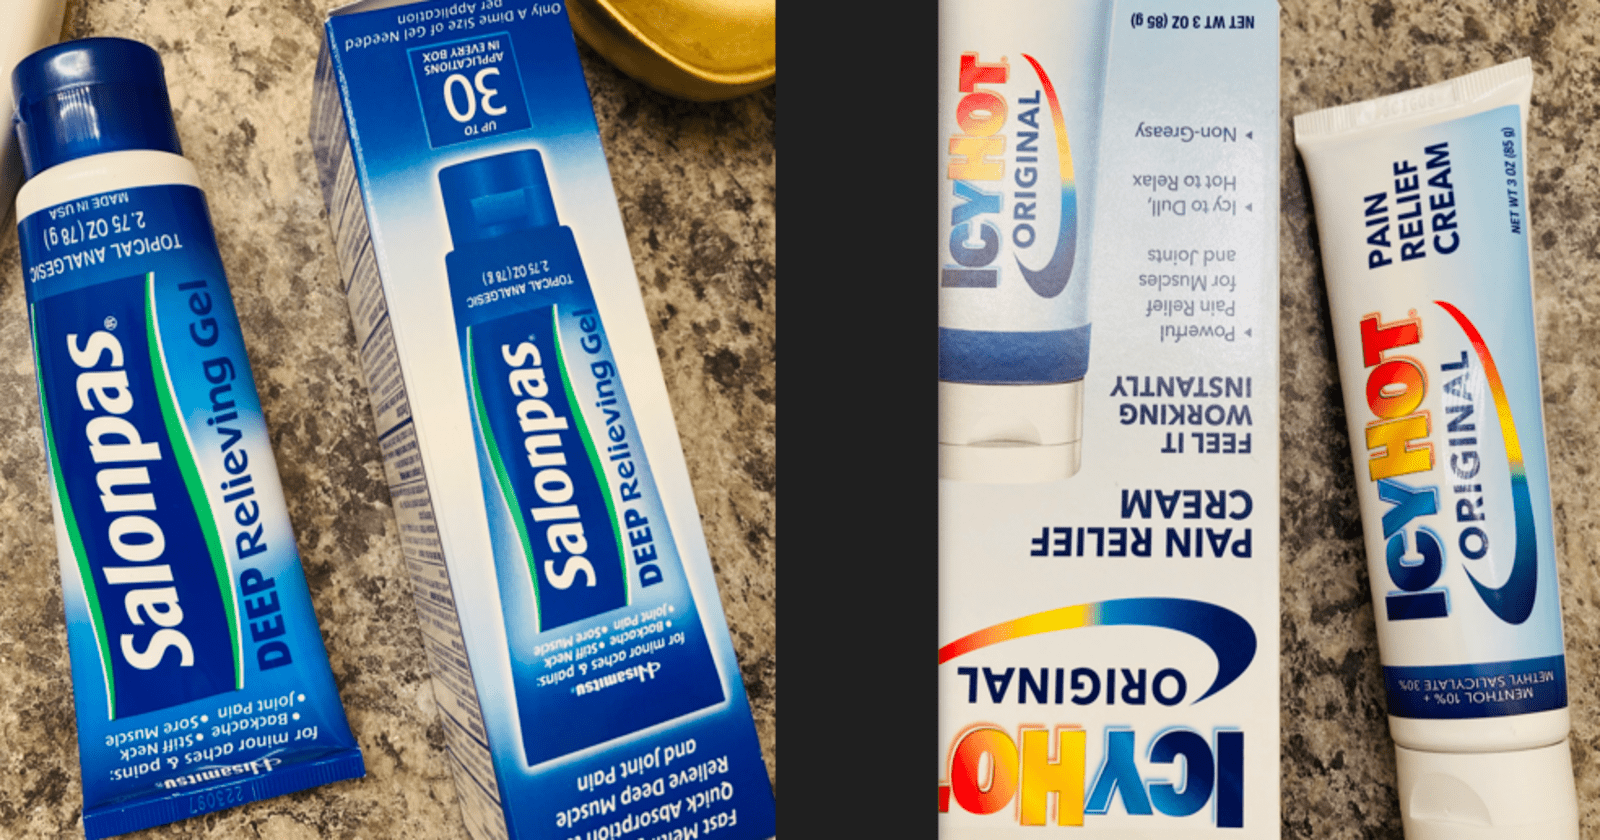 Salonpas vs Icy Hot: differences in these pain relief